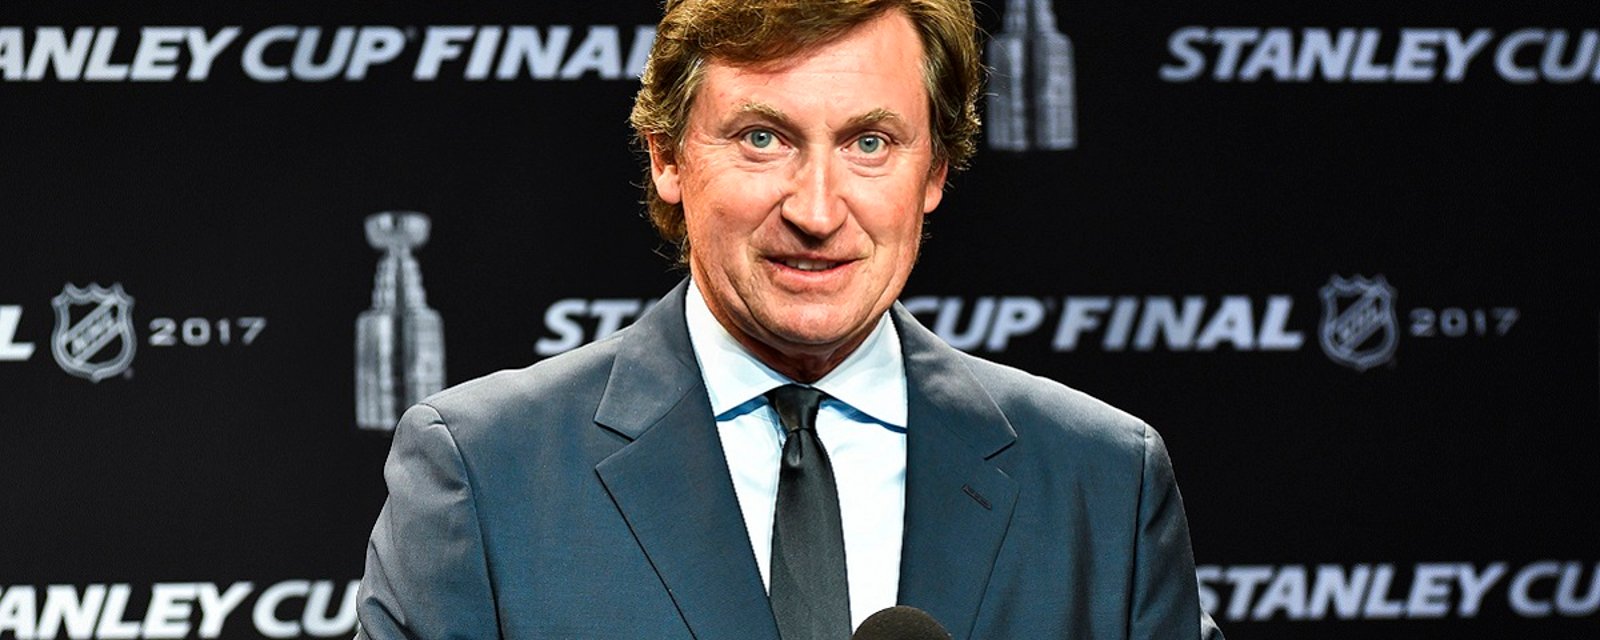 Gretzky compares a current NHL player to himself. 